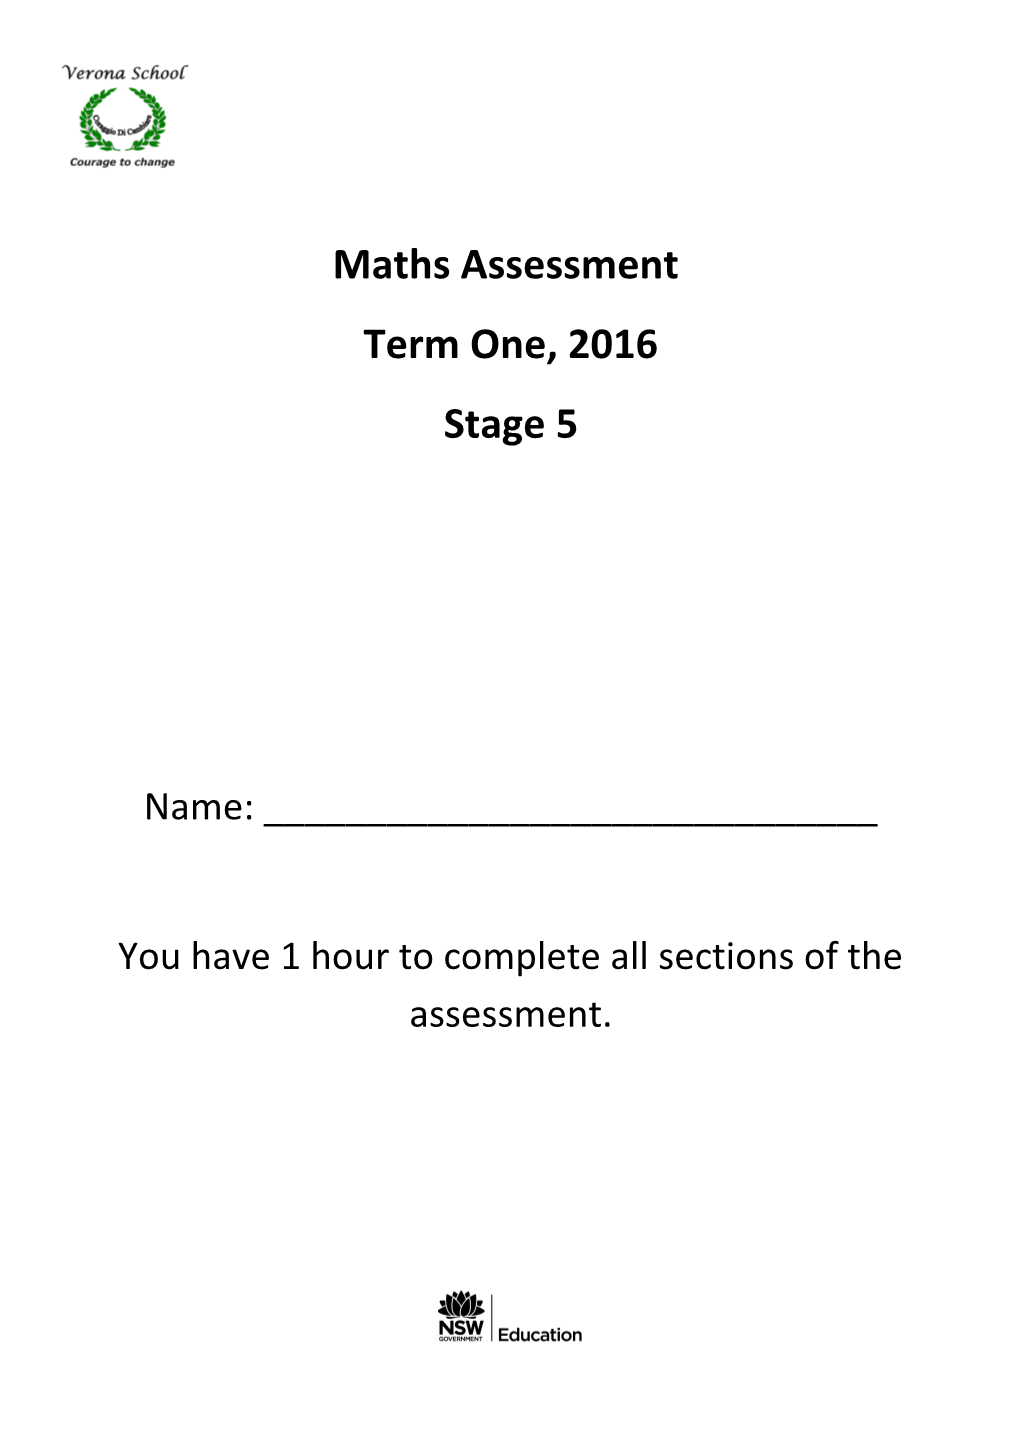 You Have 1 Hour to Complete All Sections of the Assessment